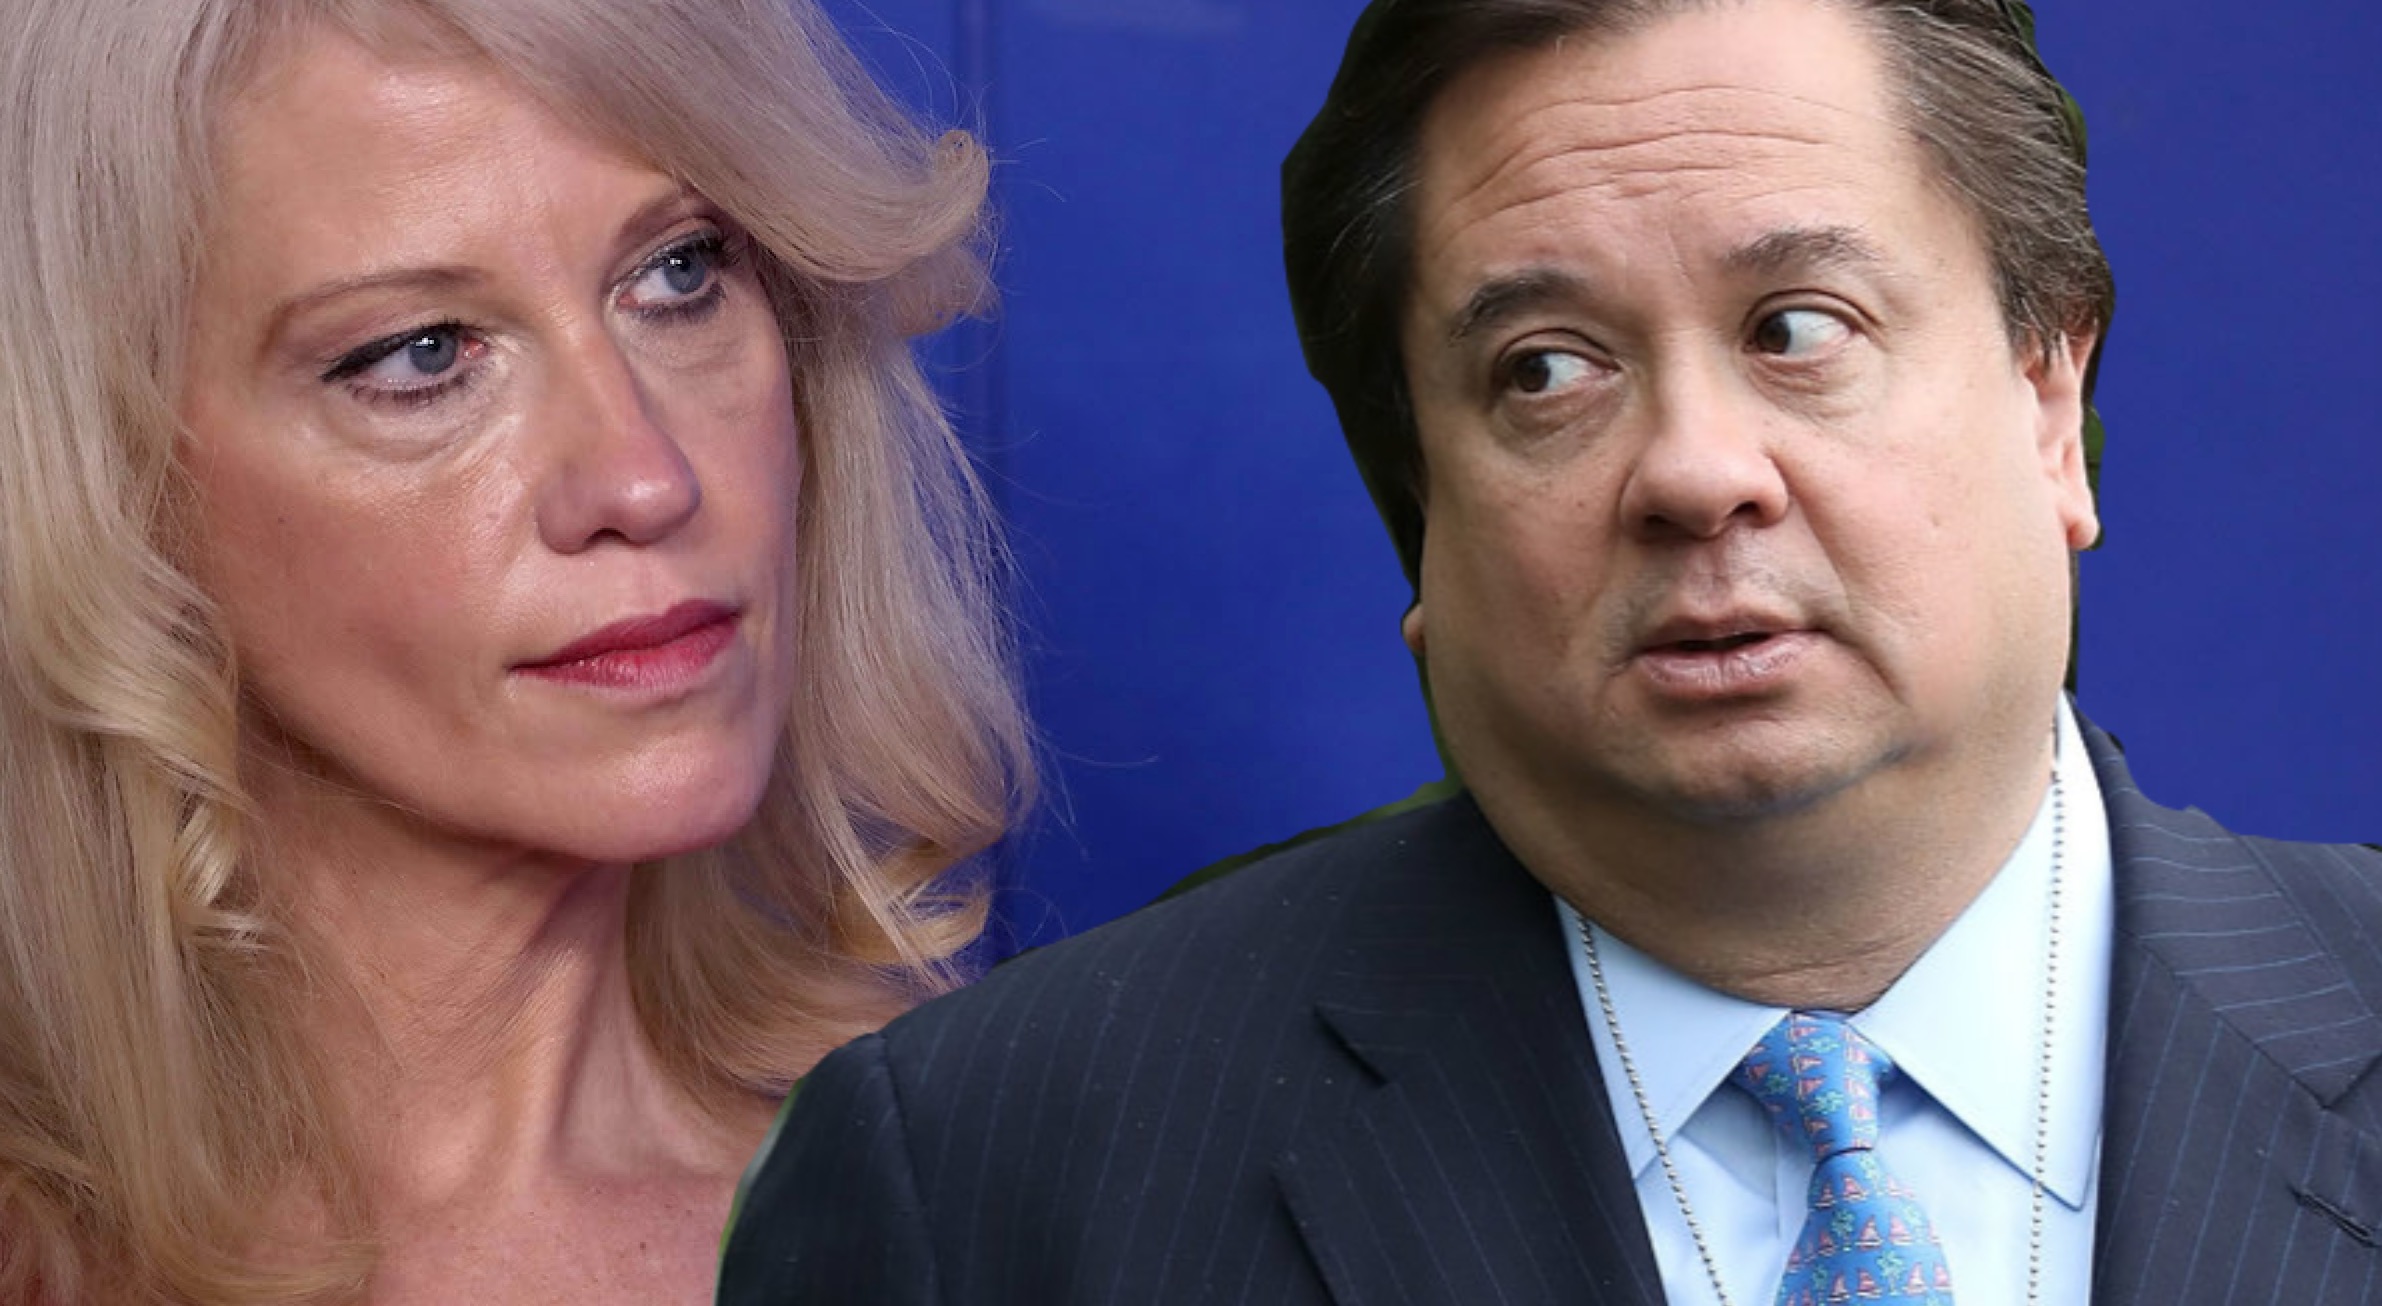 Trump Rips ‘Mentally ill’ George Conway: ‘I Don’t Know What Kellyanne Did to Him, But It Must Have Been Really Bad’